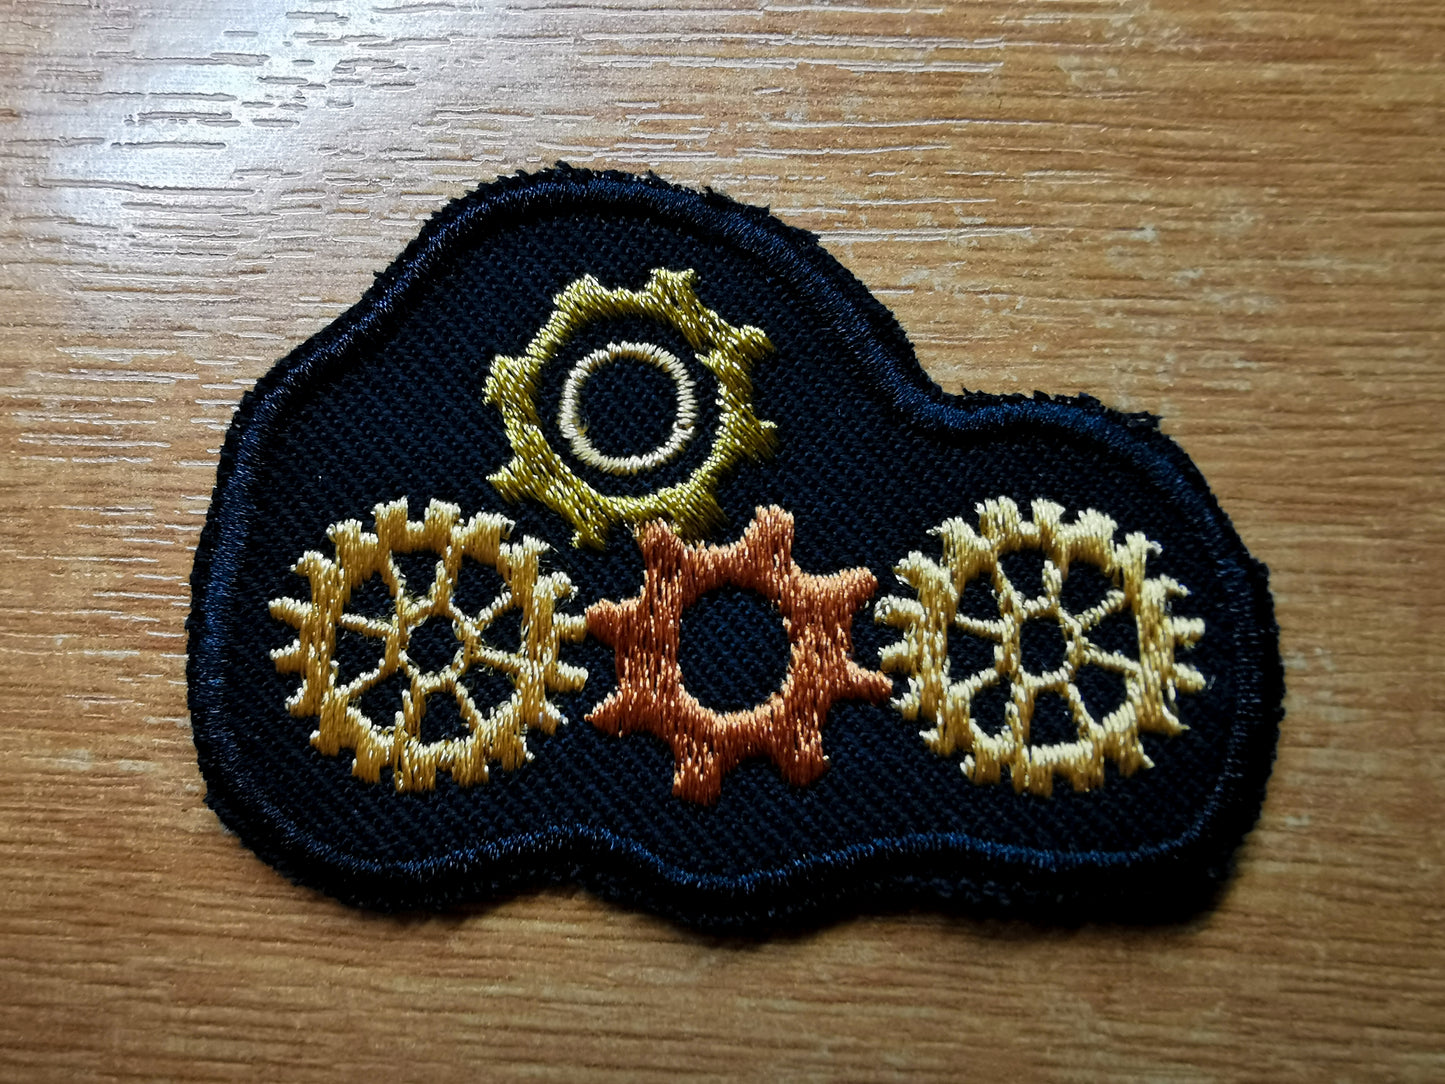 Steampunk Gears and Cogs Embroidered Patch